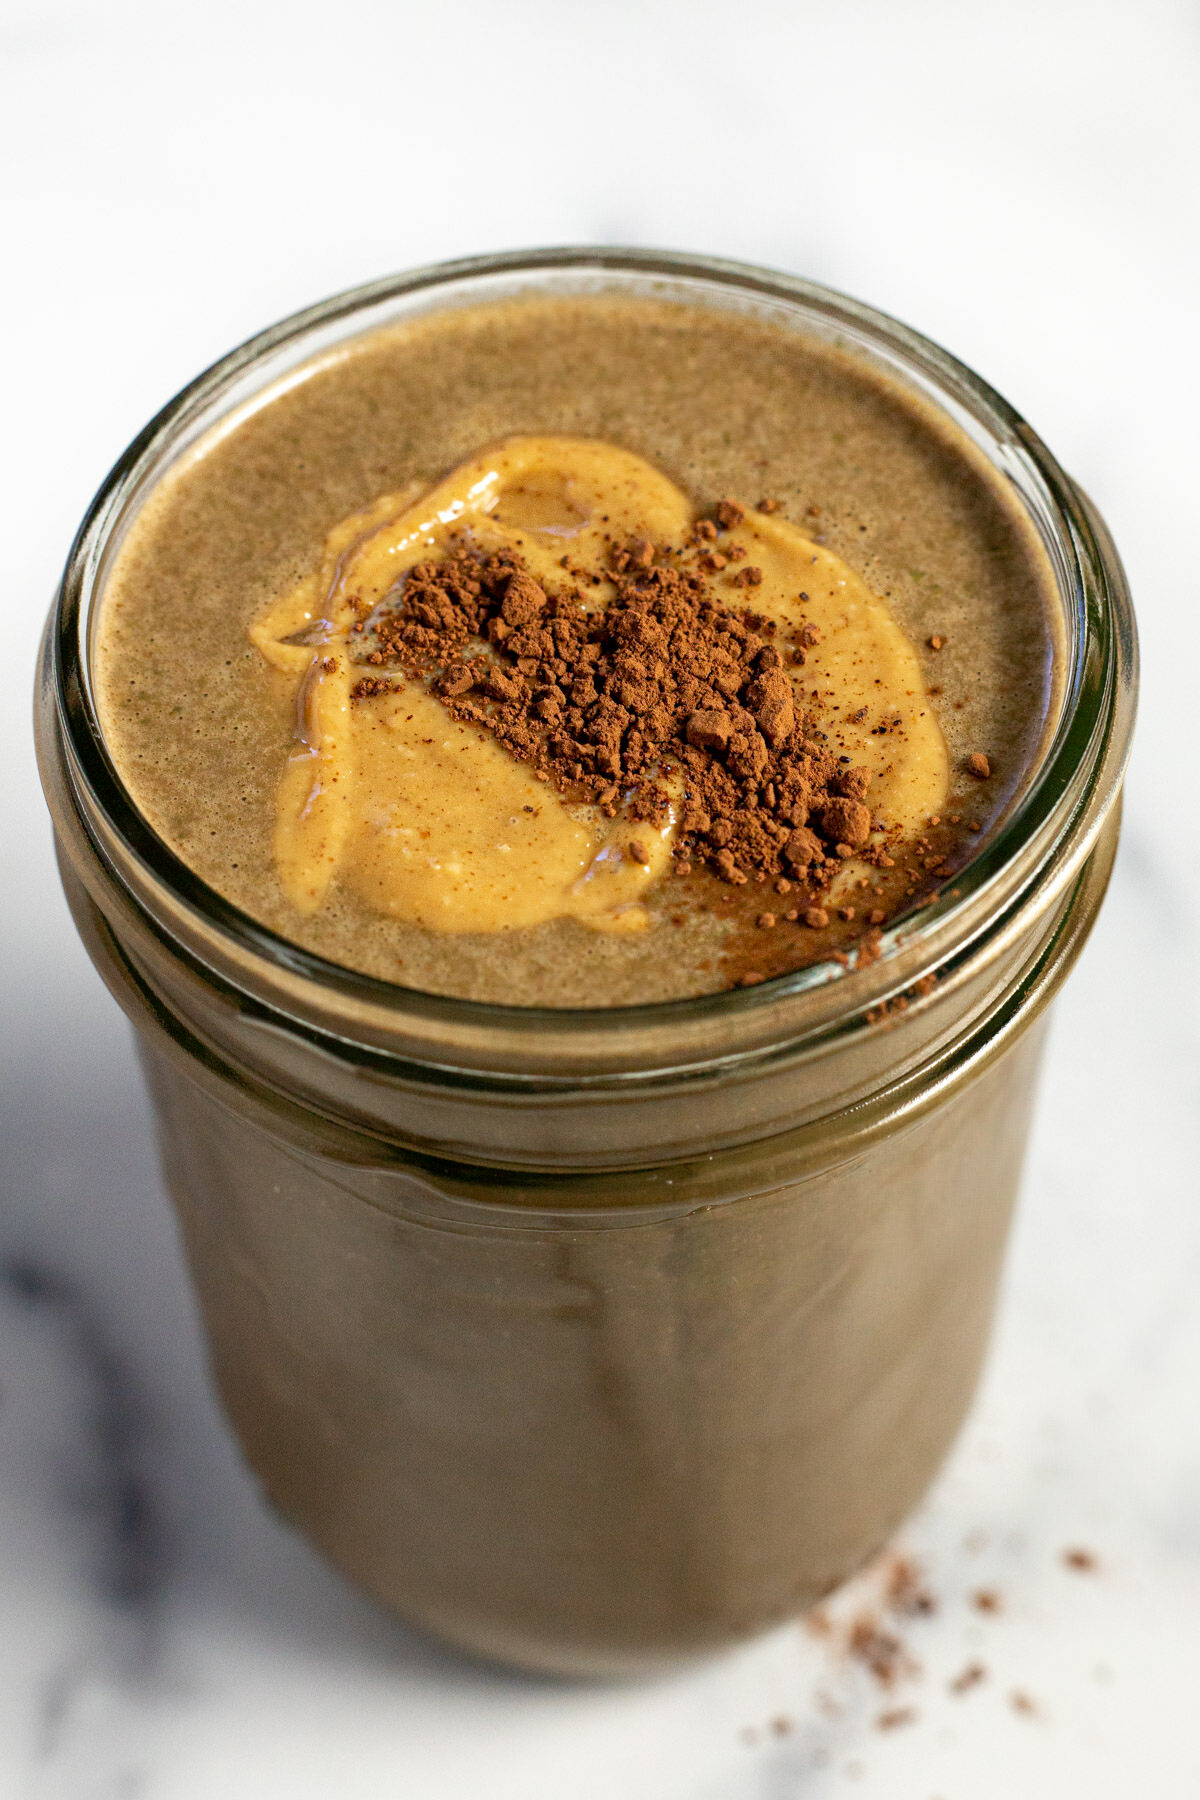 Close up shot of a chocolate smoothie garnished with peanut butter and cocoa powder